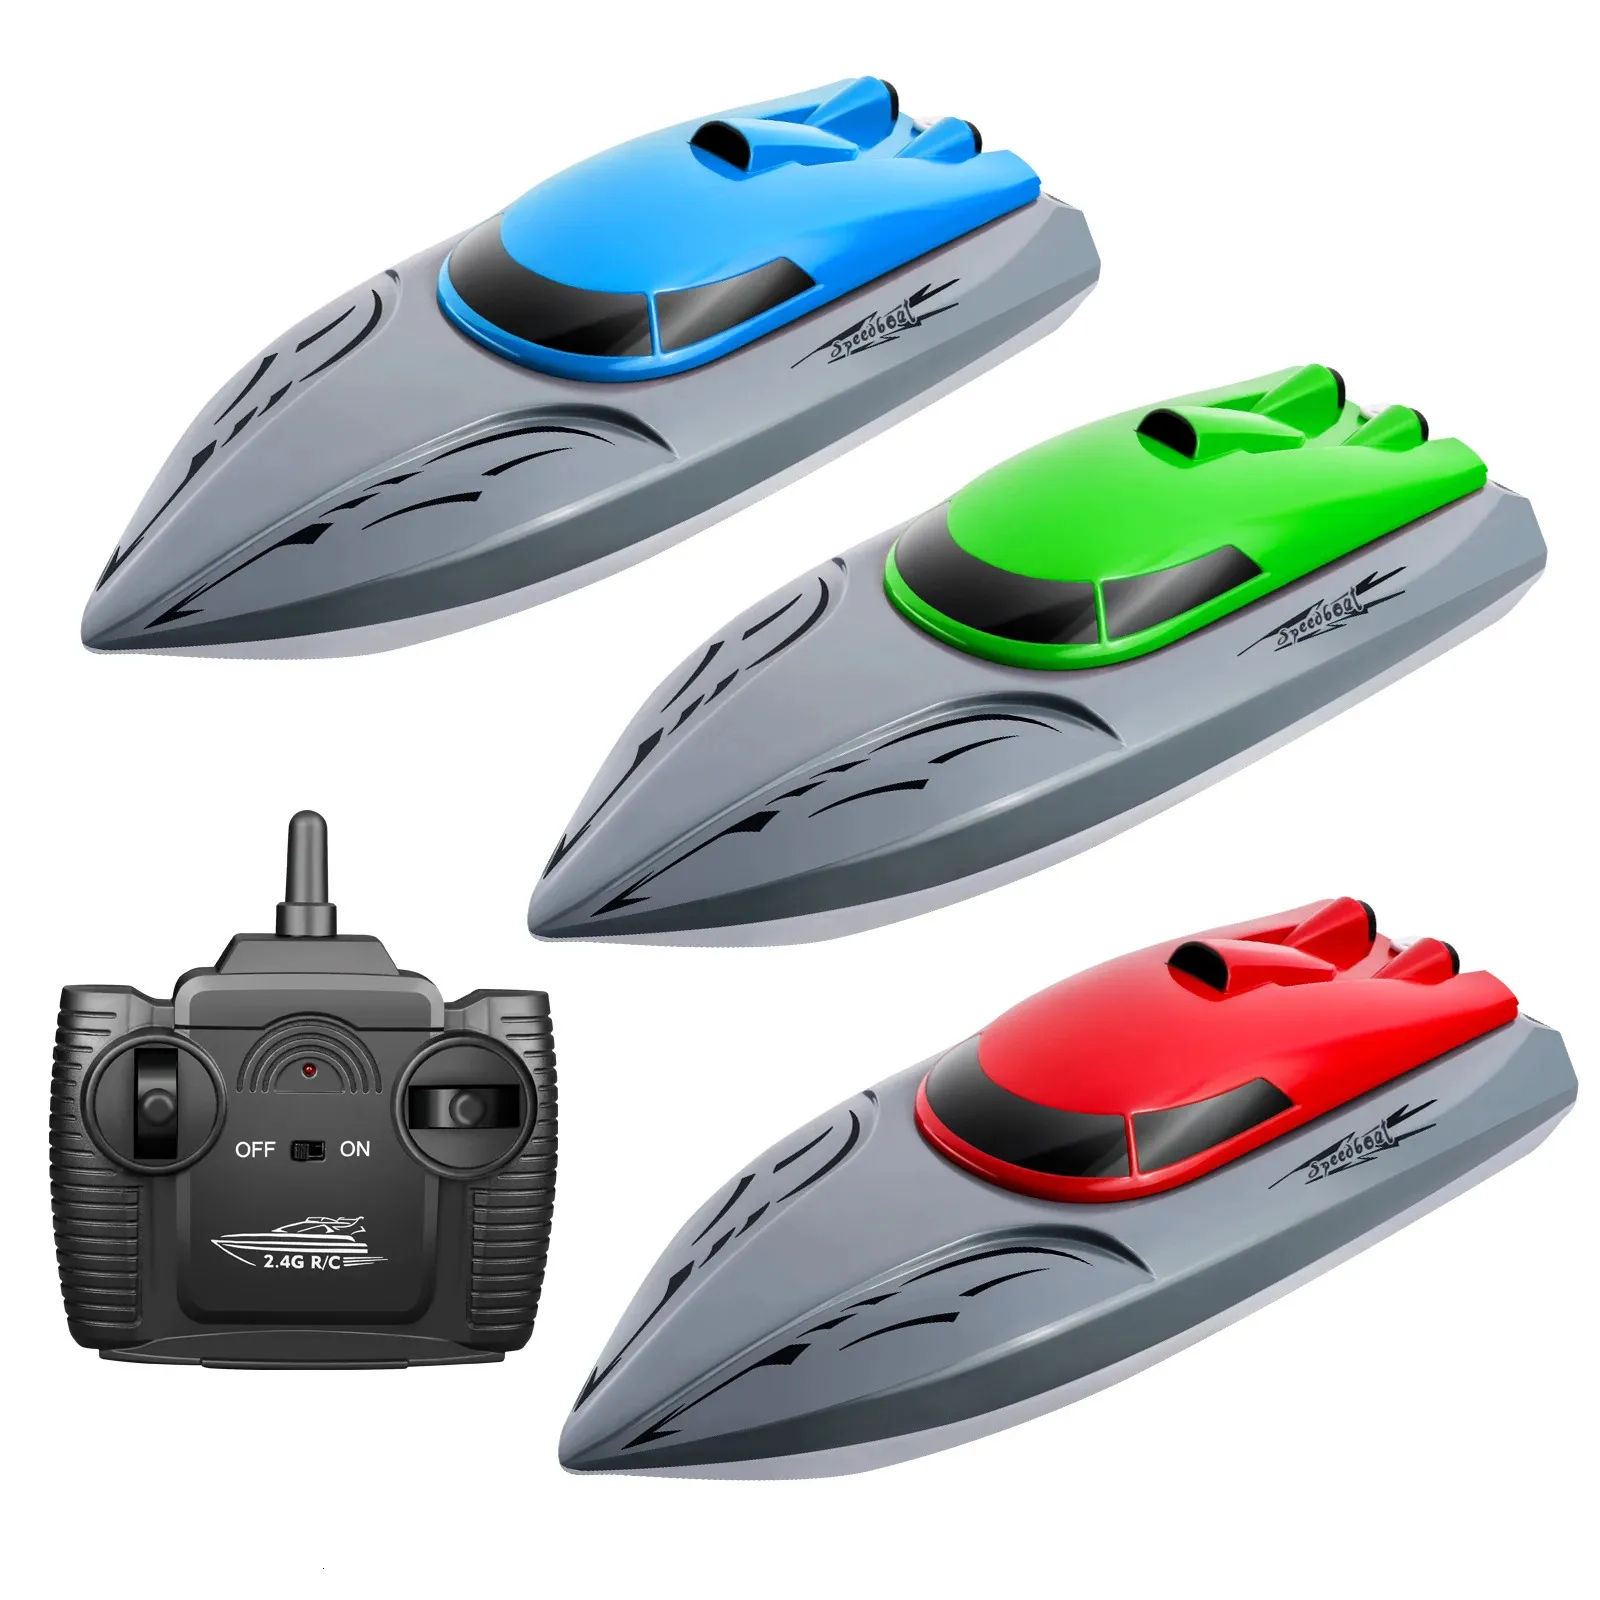 RC boat 2.4G 15kmh Dual rudder Motor waterproof ABS high-speed boat childrens Summer Toys Gift for Boys remote control ship 240510